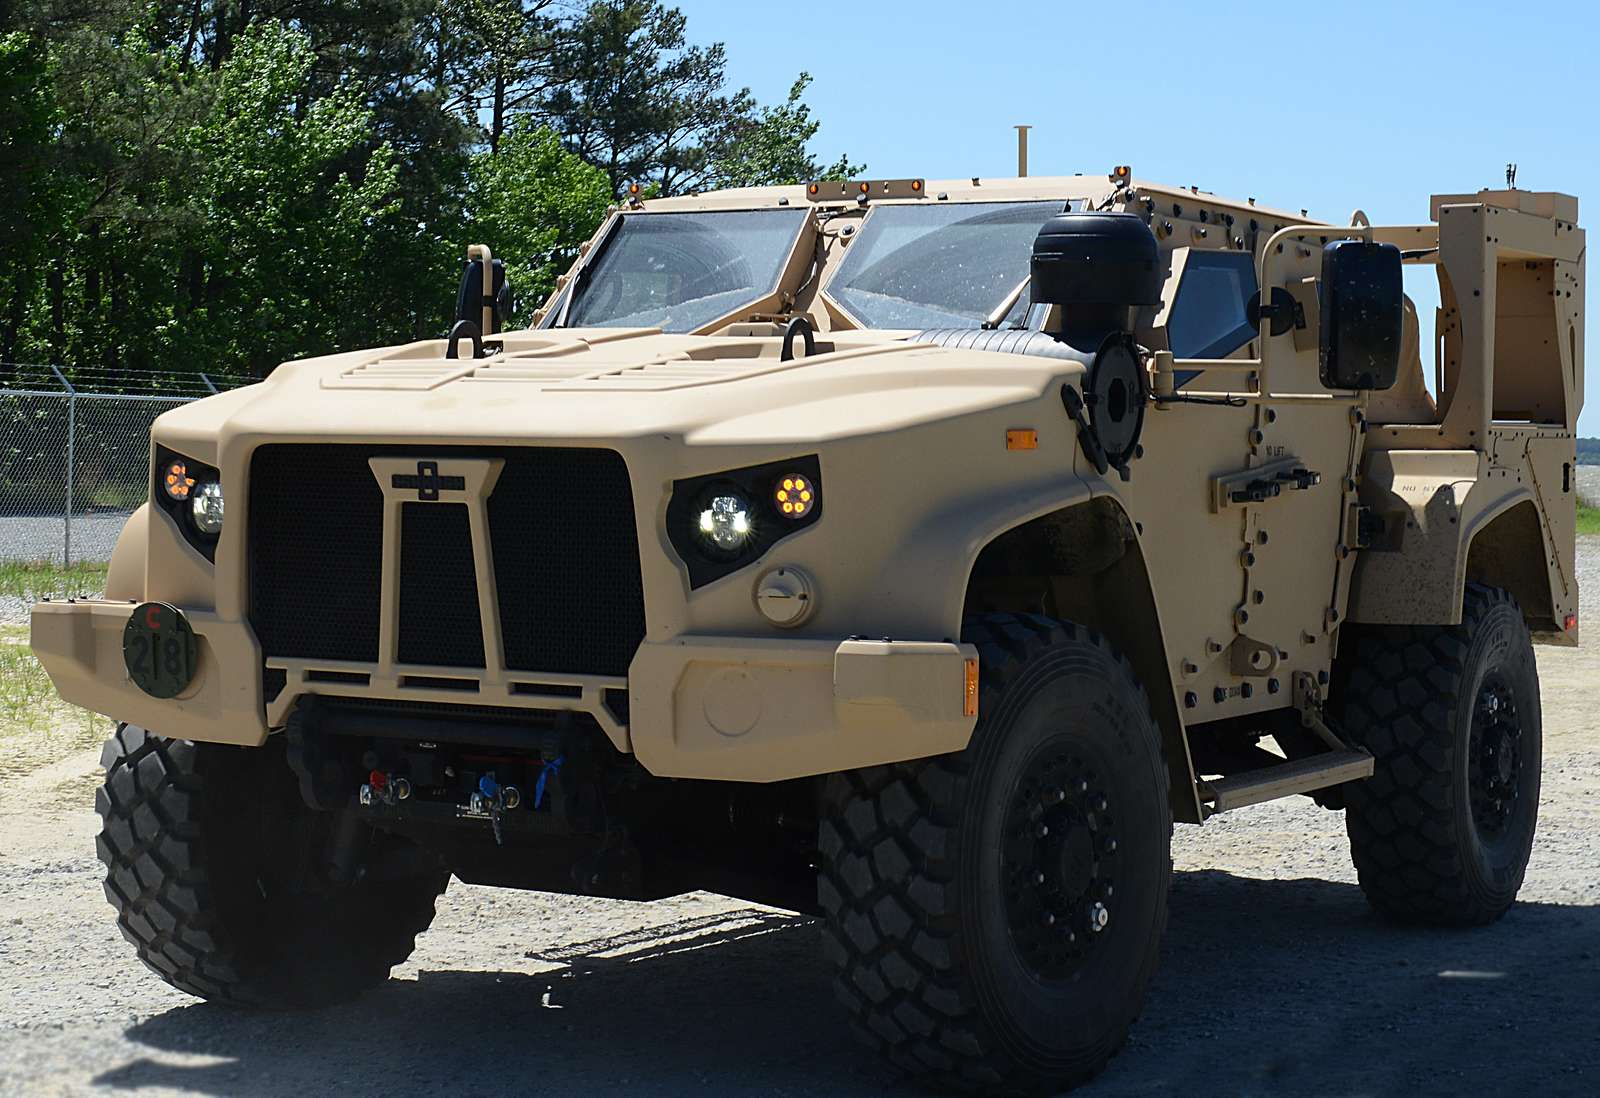 Greek Army is interested in SPEAR 120mm mortar system mounted on JLTV - GEOPOLITIKI